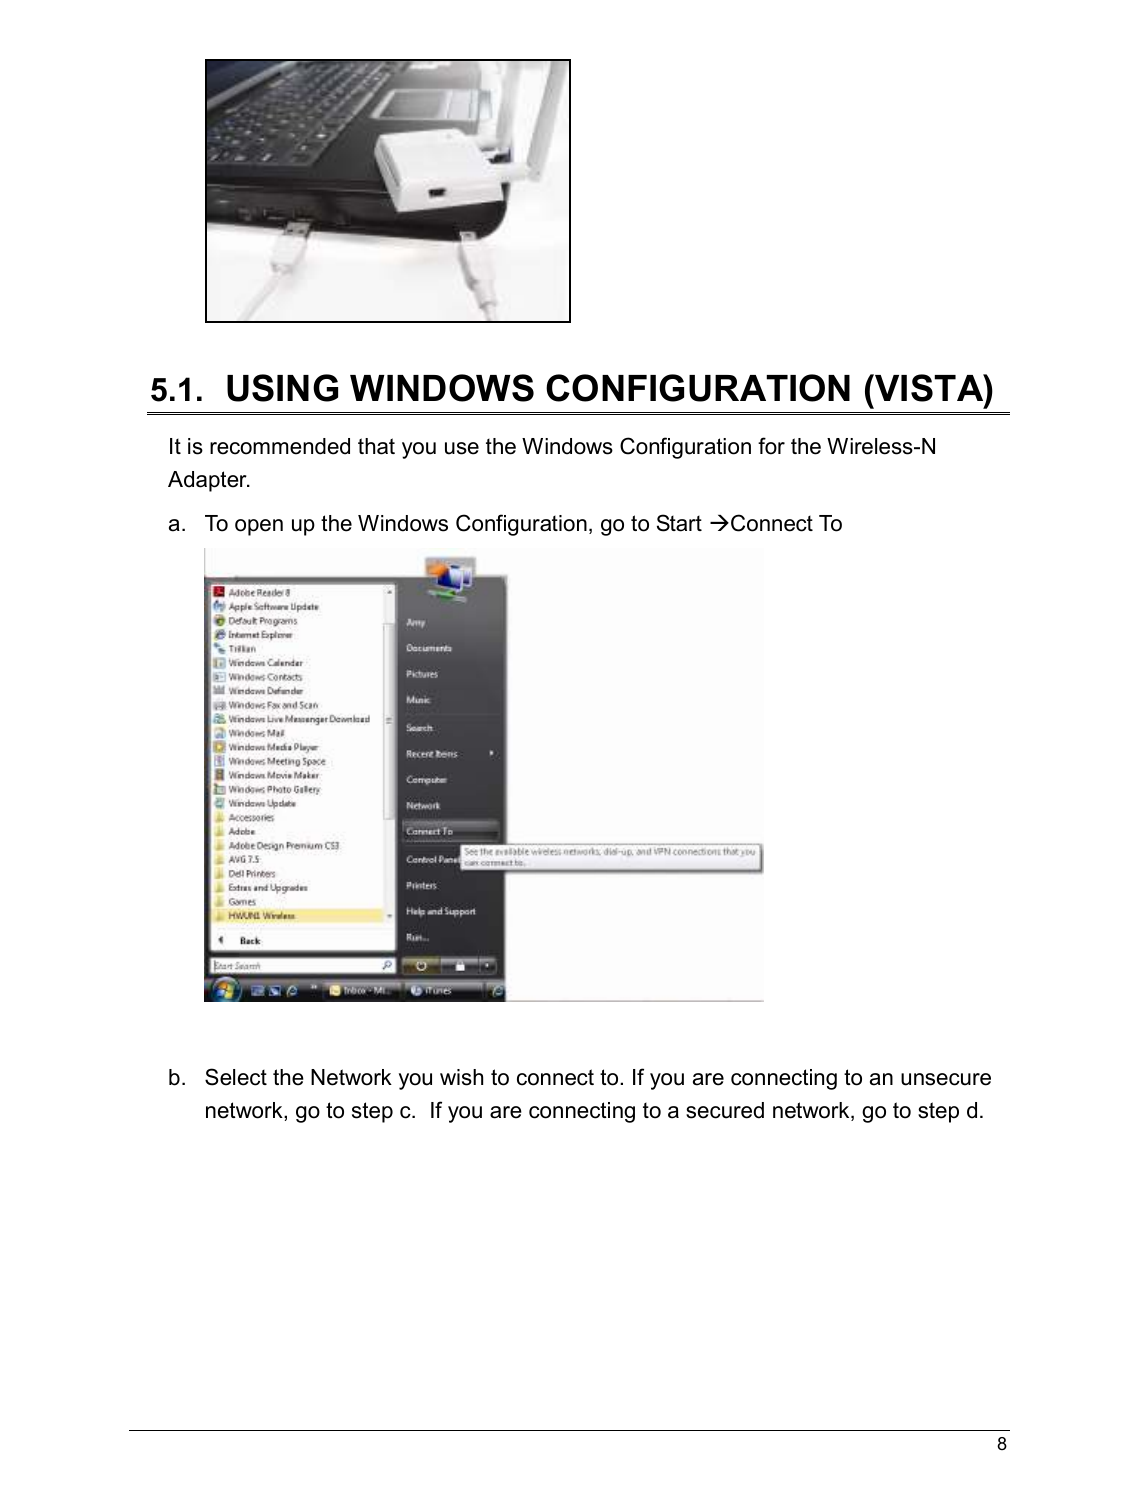   8                                                    5.1.   USING WINDOWS CONFIGURATION (VISTA) It is recommended that you use the Windows Configuration for the Wireless-N Adapter.  a.  To open up the Windows Configuration, go to Start Connect To   b.  Select the Network you wish to connect to. If you are connecting to an unsecure network, go to step c.  If you are connecting to a secured network, go to step d.  